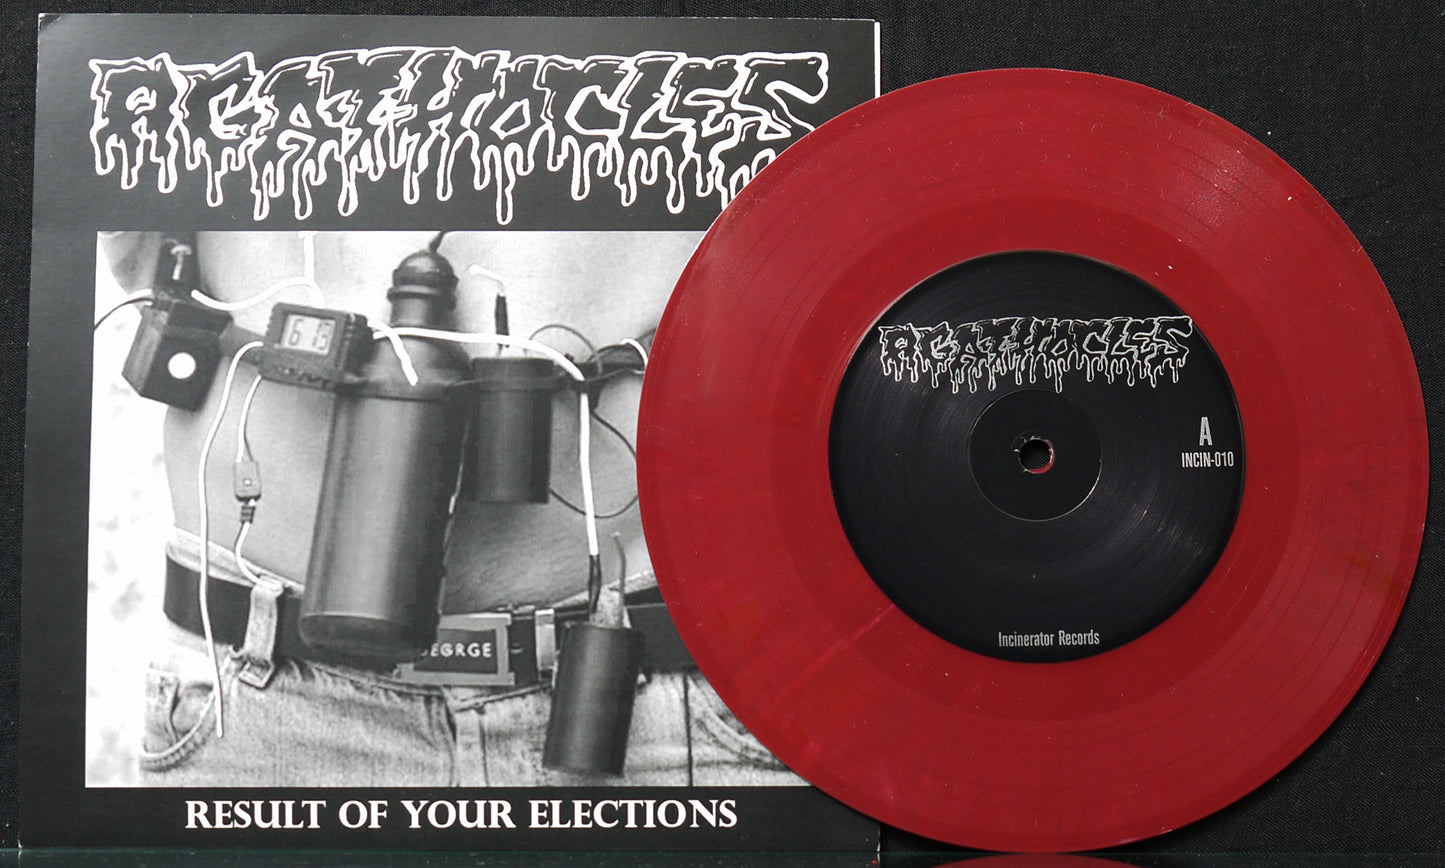 AGATHOCLES / INFECTING THE DISSECTED - Split 7"